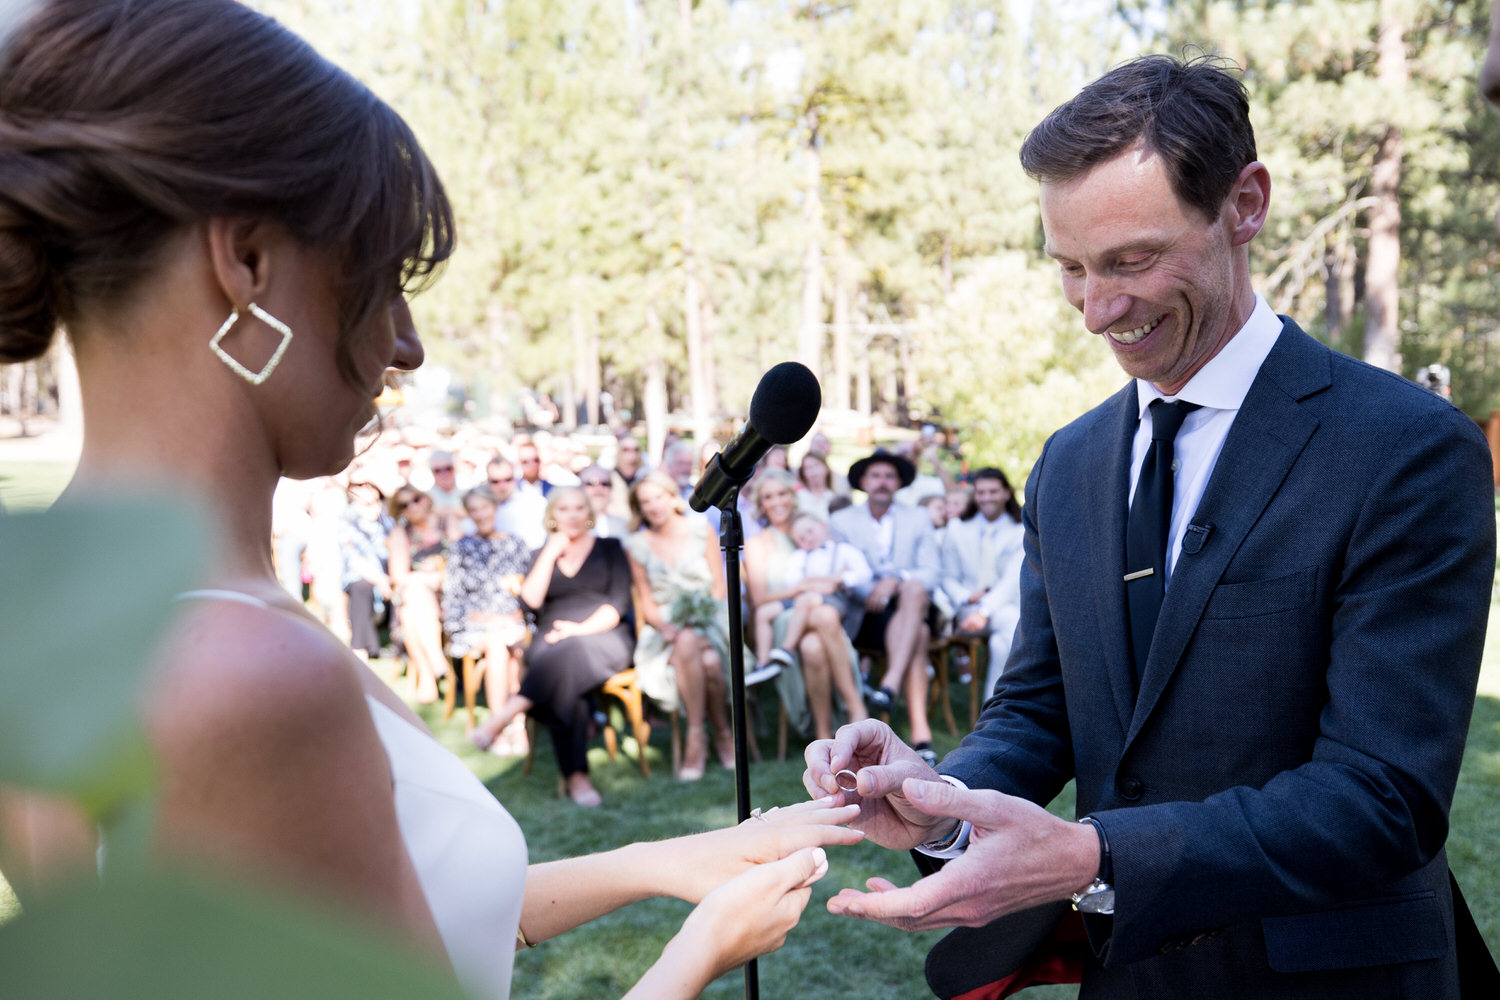 A smiling groom places a wedding ring on his bride's finger during their outdoor forested wedding ceremony.